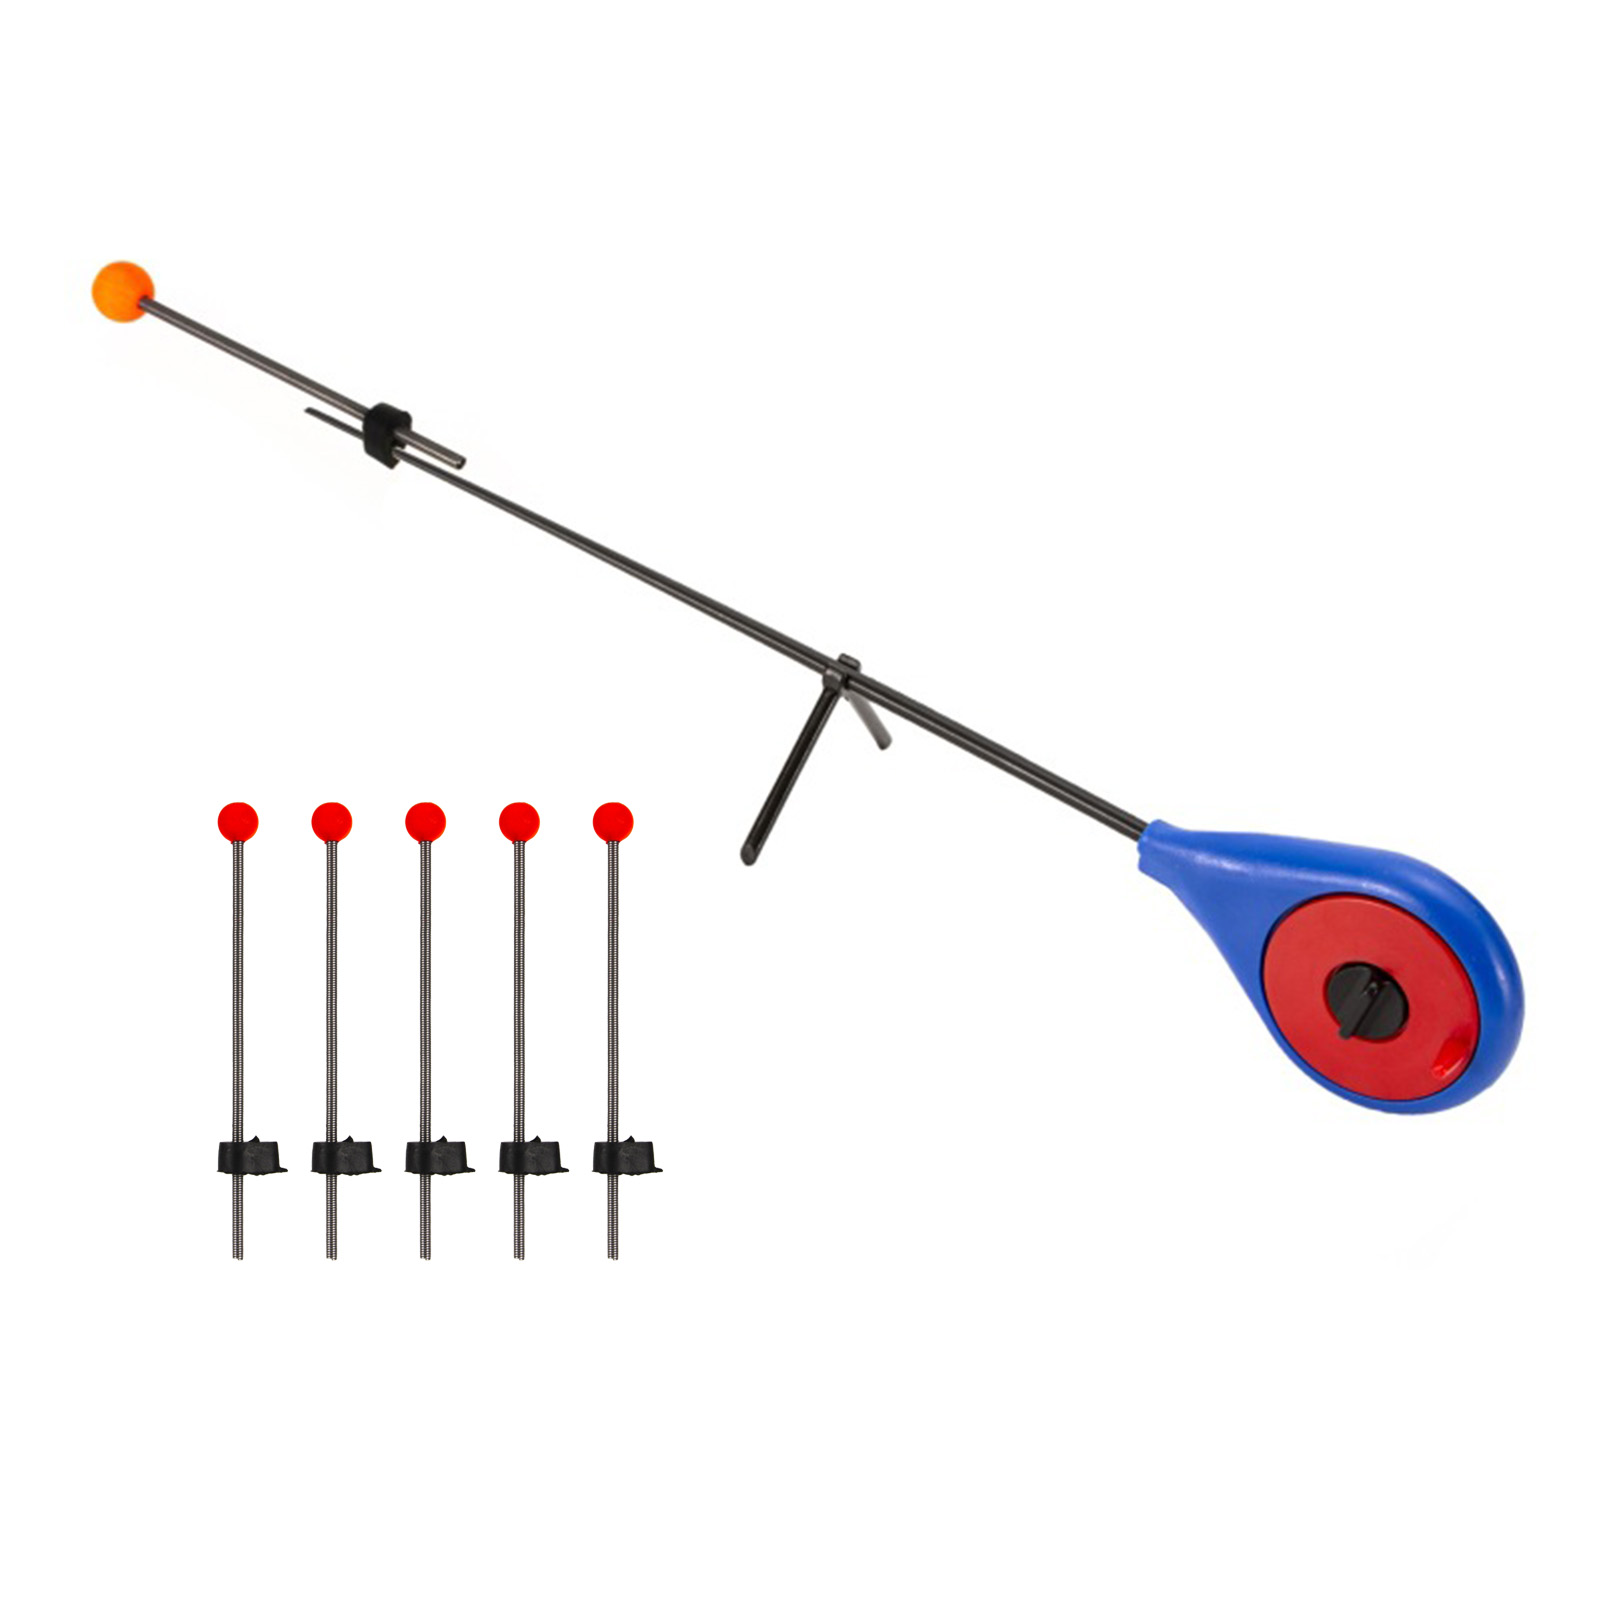 Winter Outdoor Ice Fishing Rod Tackle Tool with 5Pcs Large/Small Red Ball  Spring